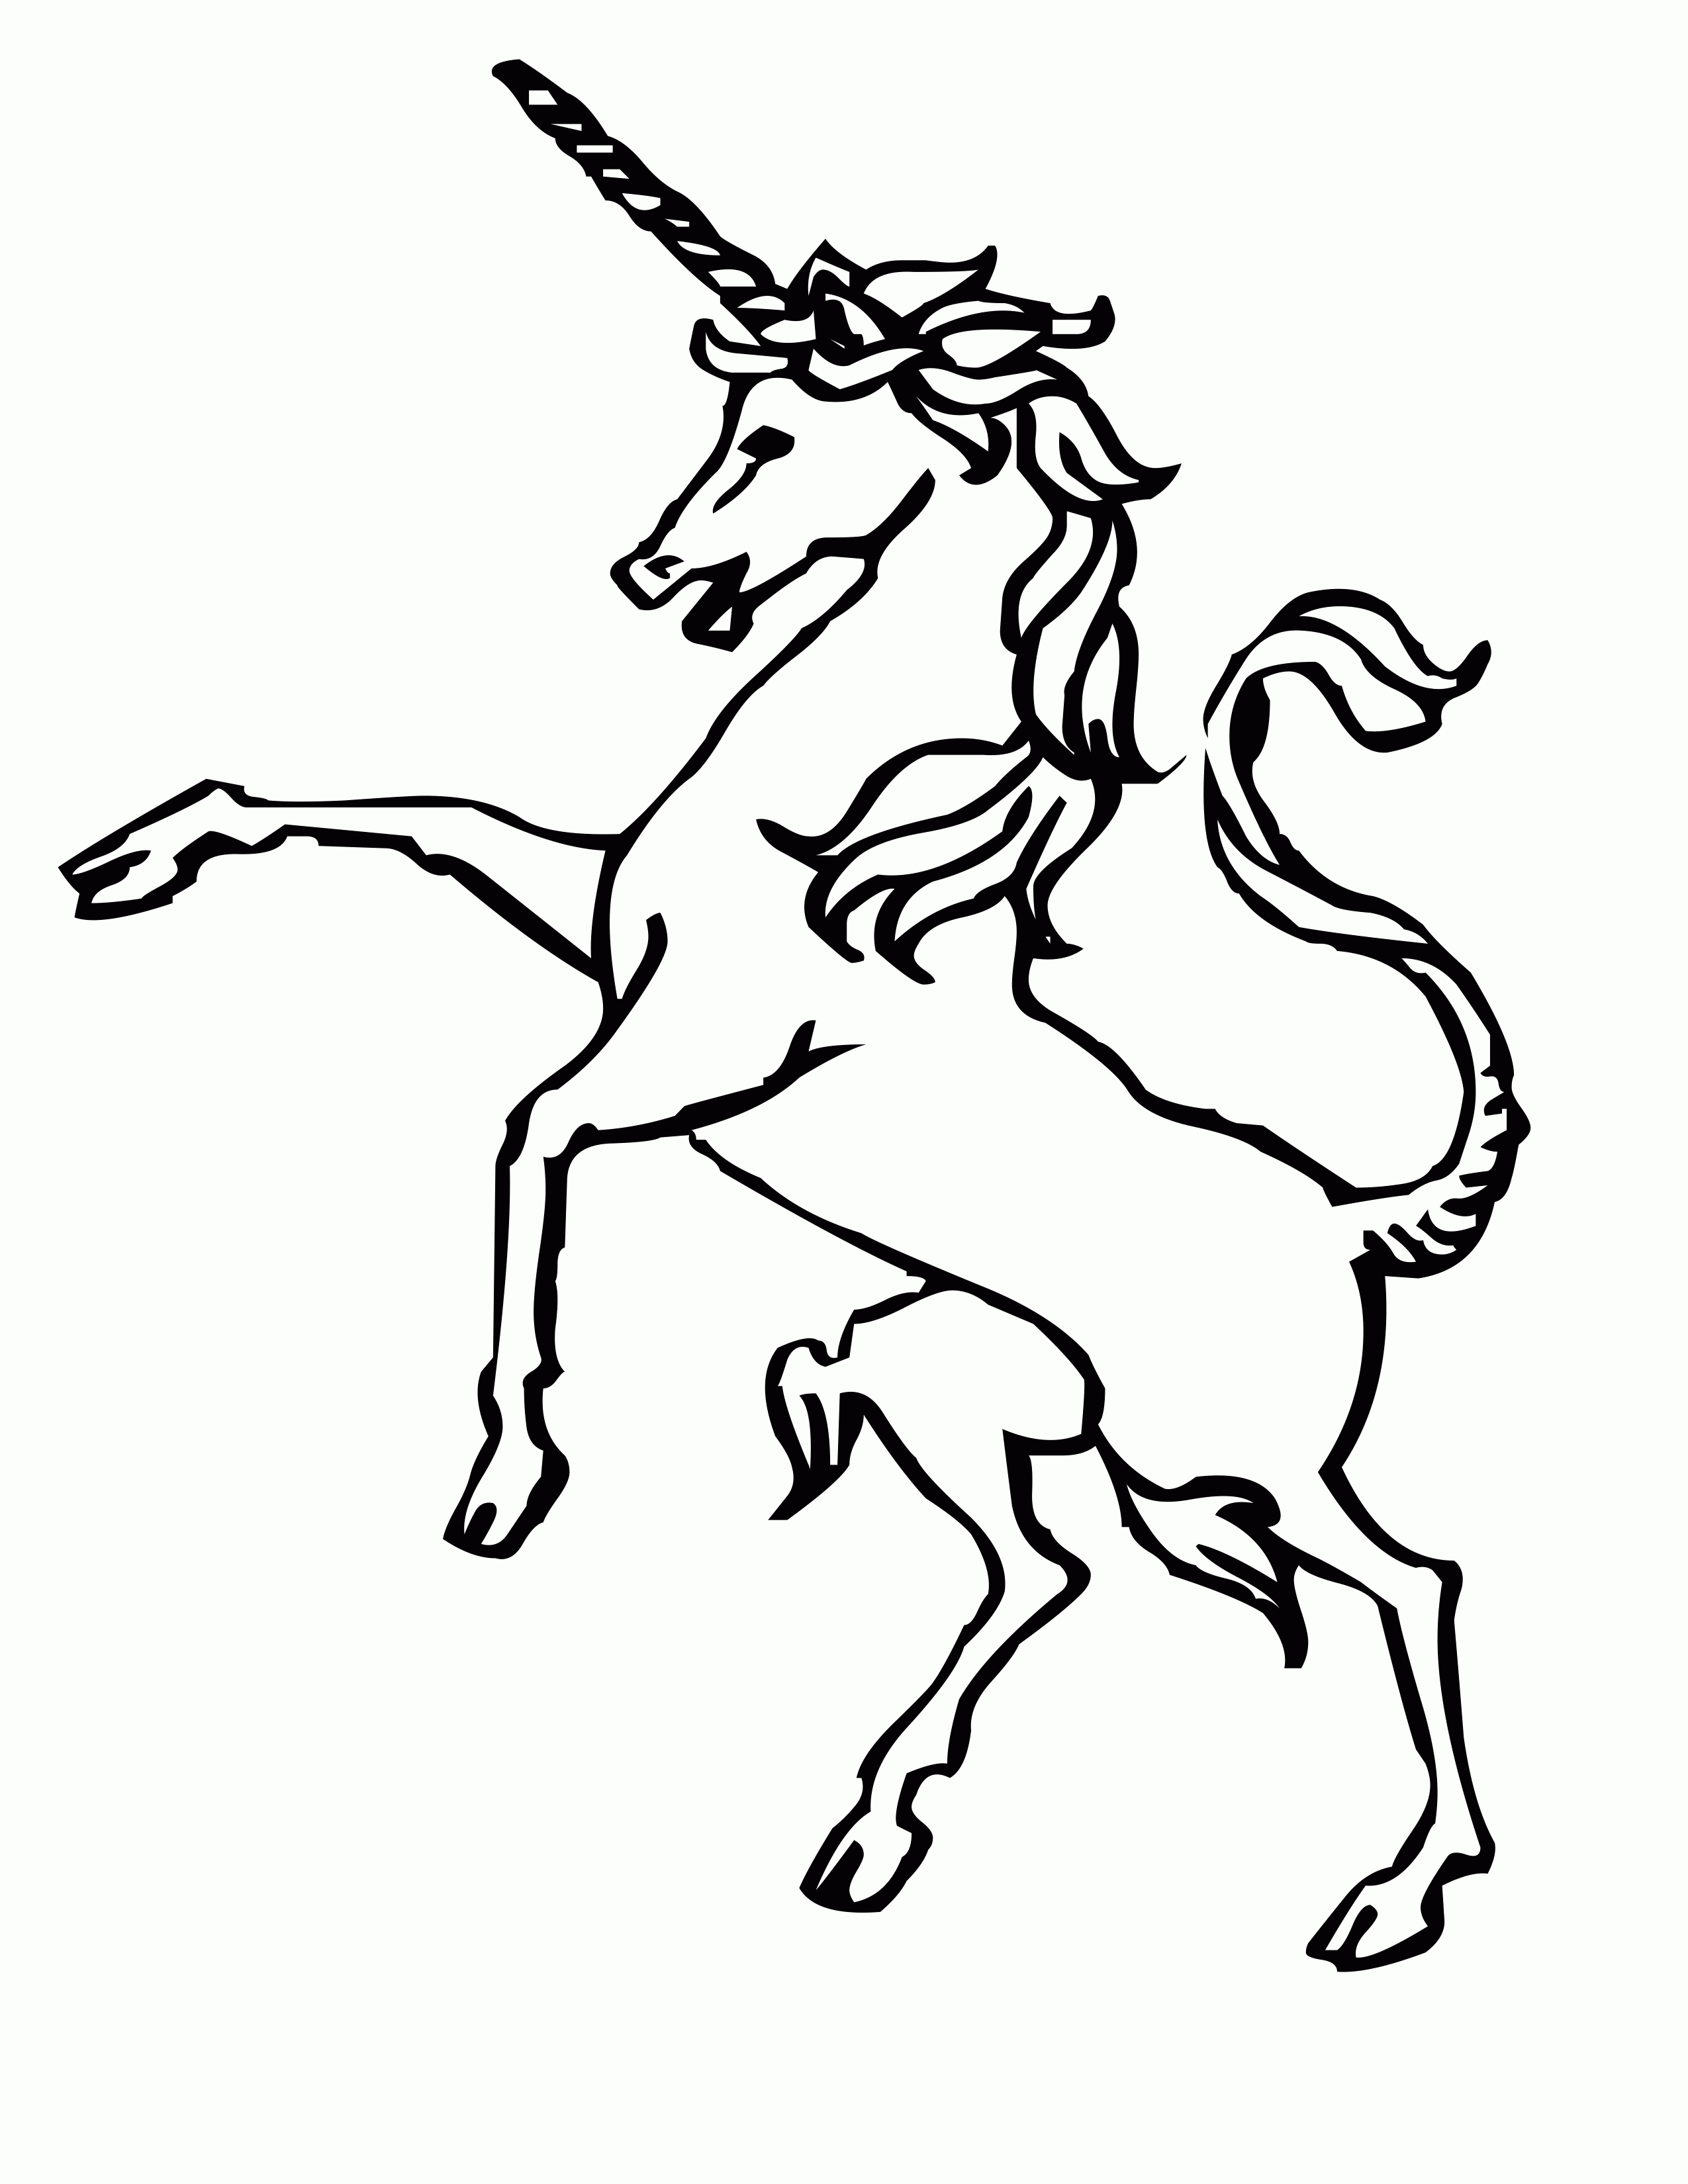 25 Best and Free Coloring Pages of Unicorn - VoteForVerde.com